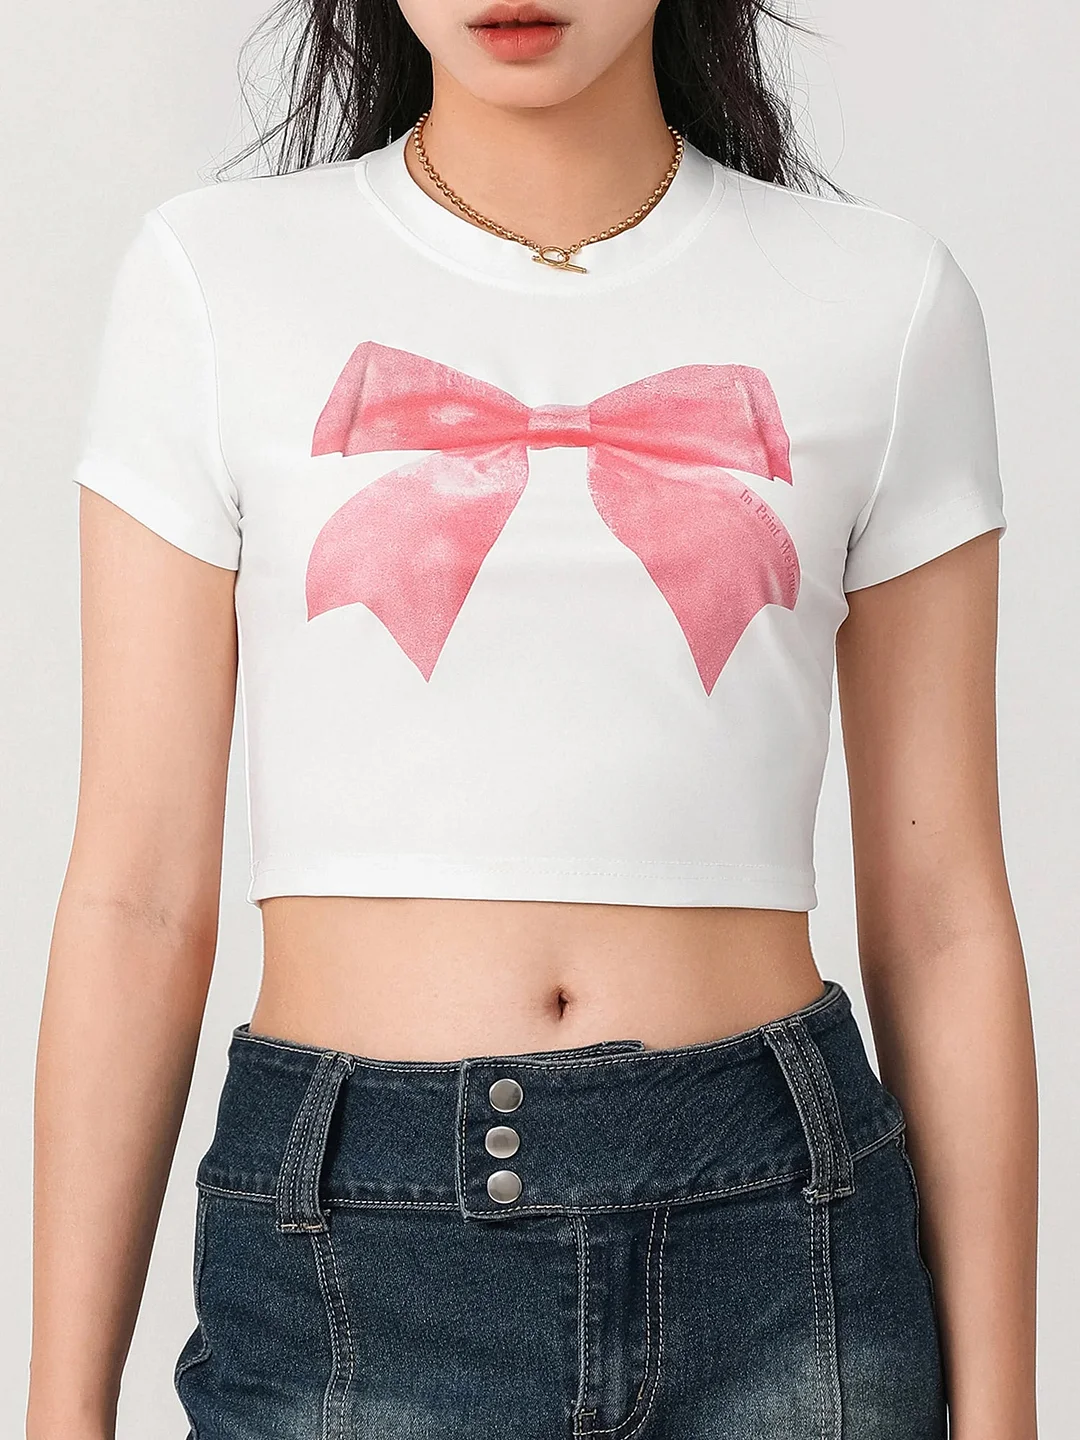 Oocharger Summer Sweet Bow Print T-Shirts Chic Fashion Short Sleeve Round Neck Crop Tops Women's Casual Basic Tees Streetwear